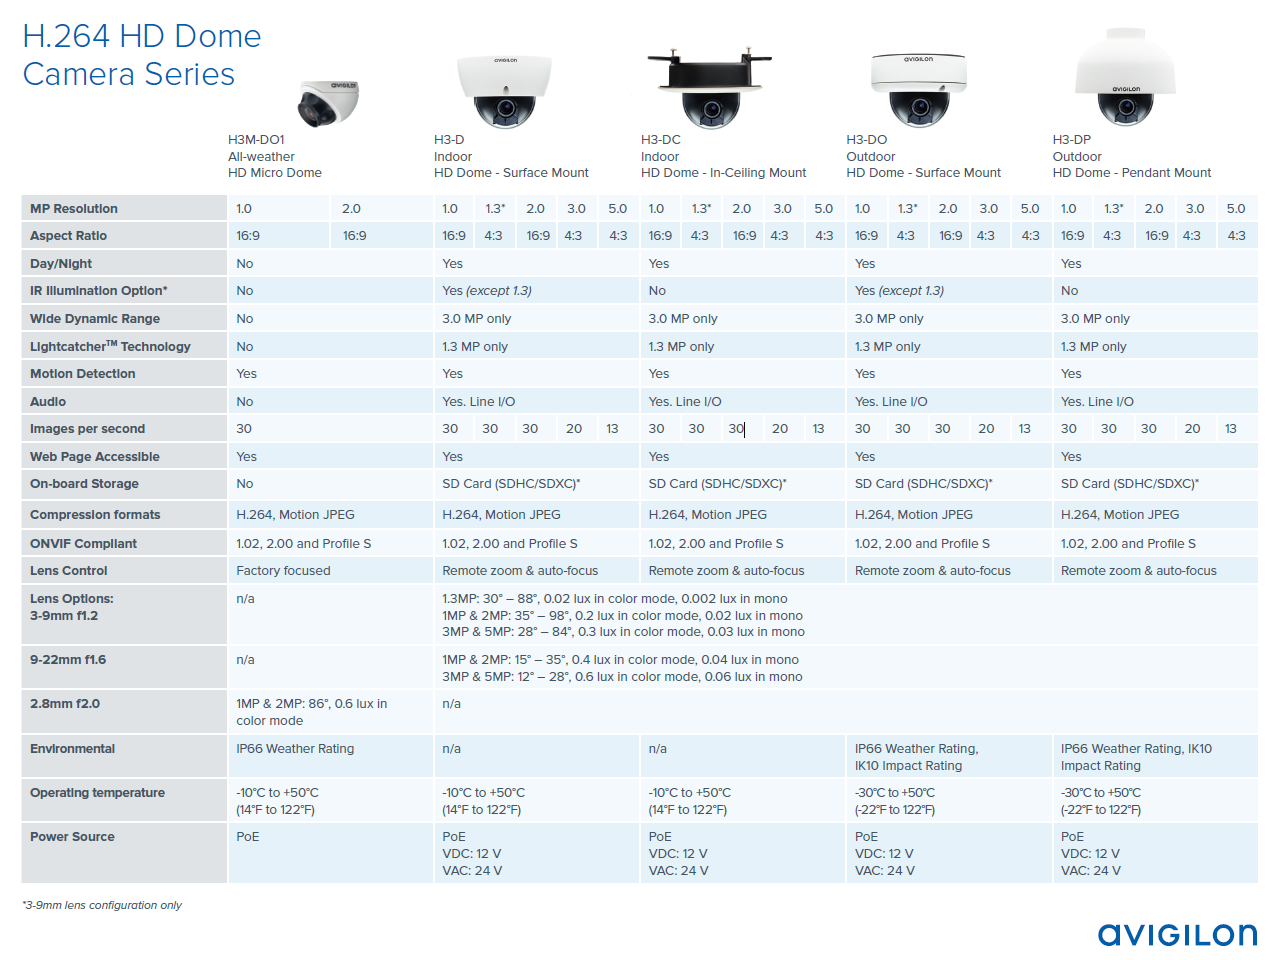 H.264 HD Dome Camera Series specifications sheet